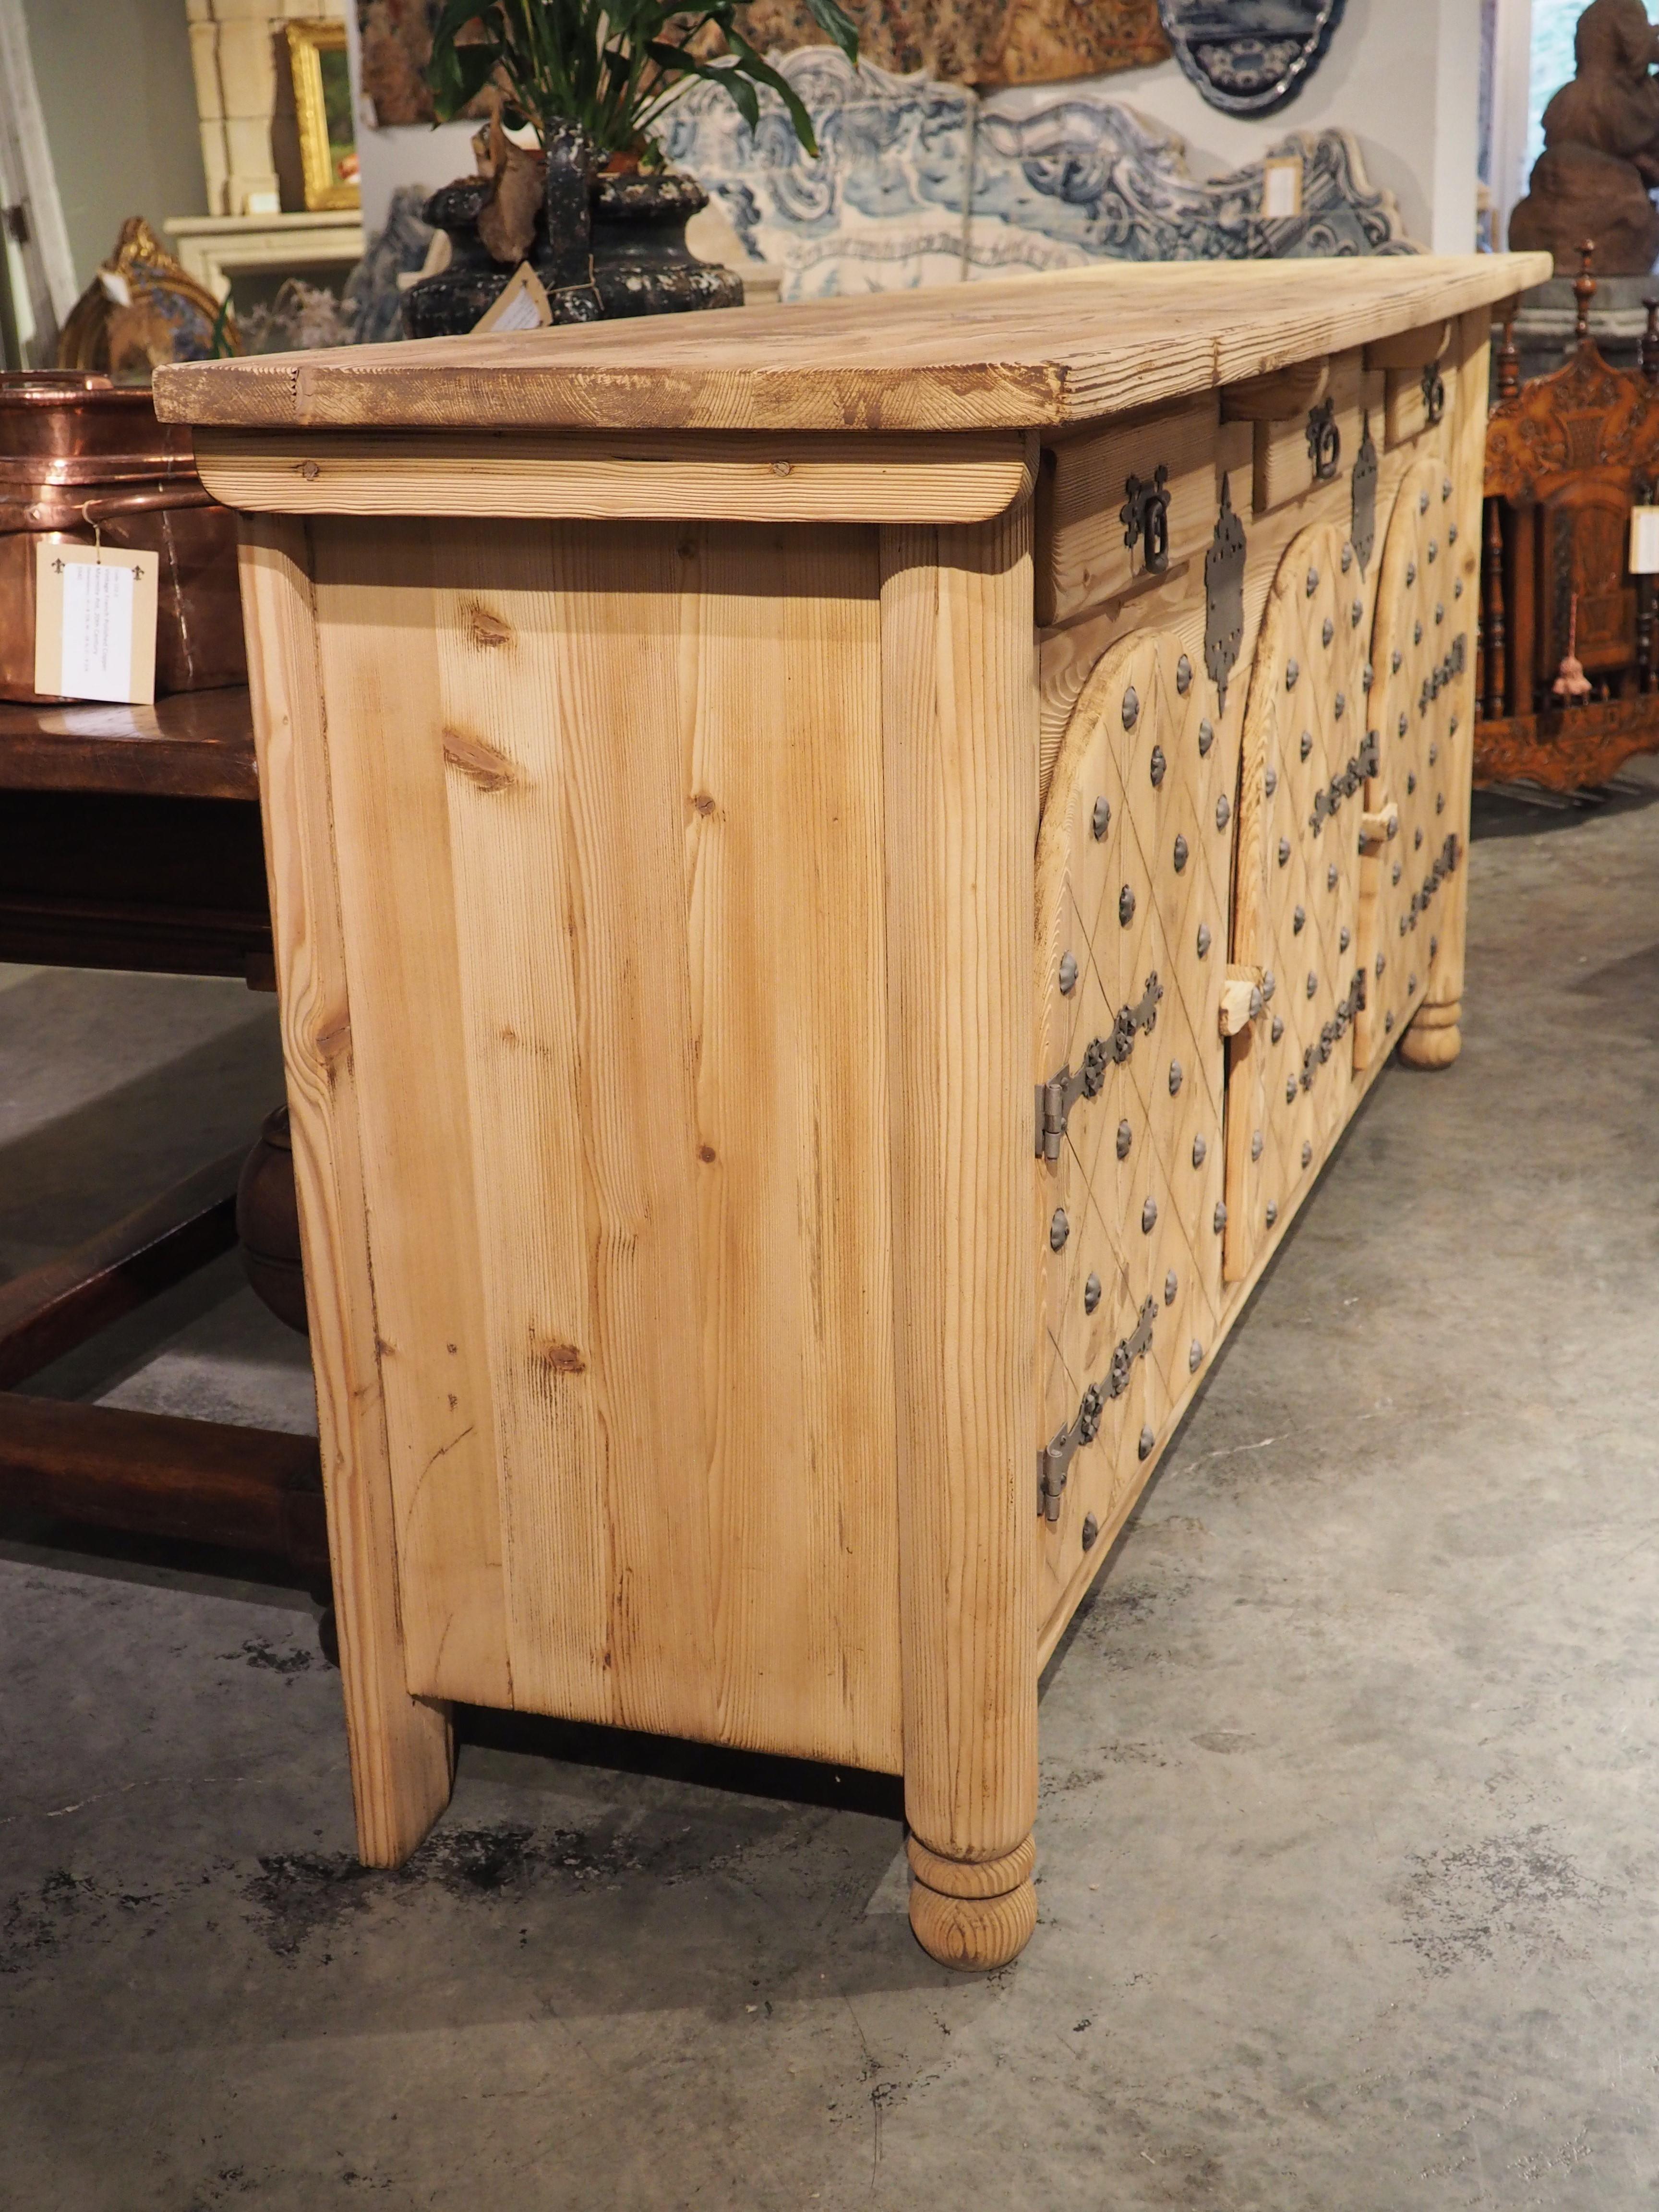 Stripped Pine Credenza from Spain with Arched Doors and Decorative Nailheads 4